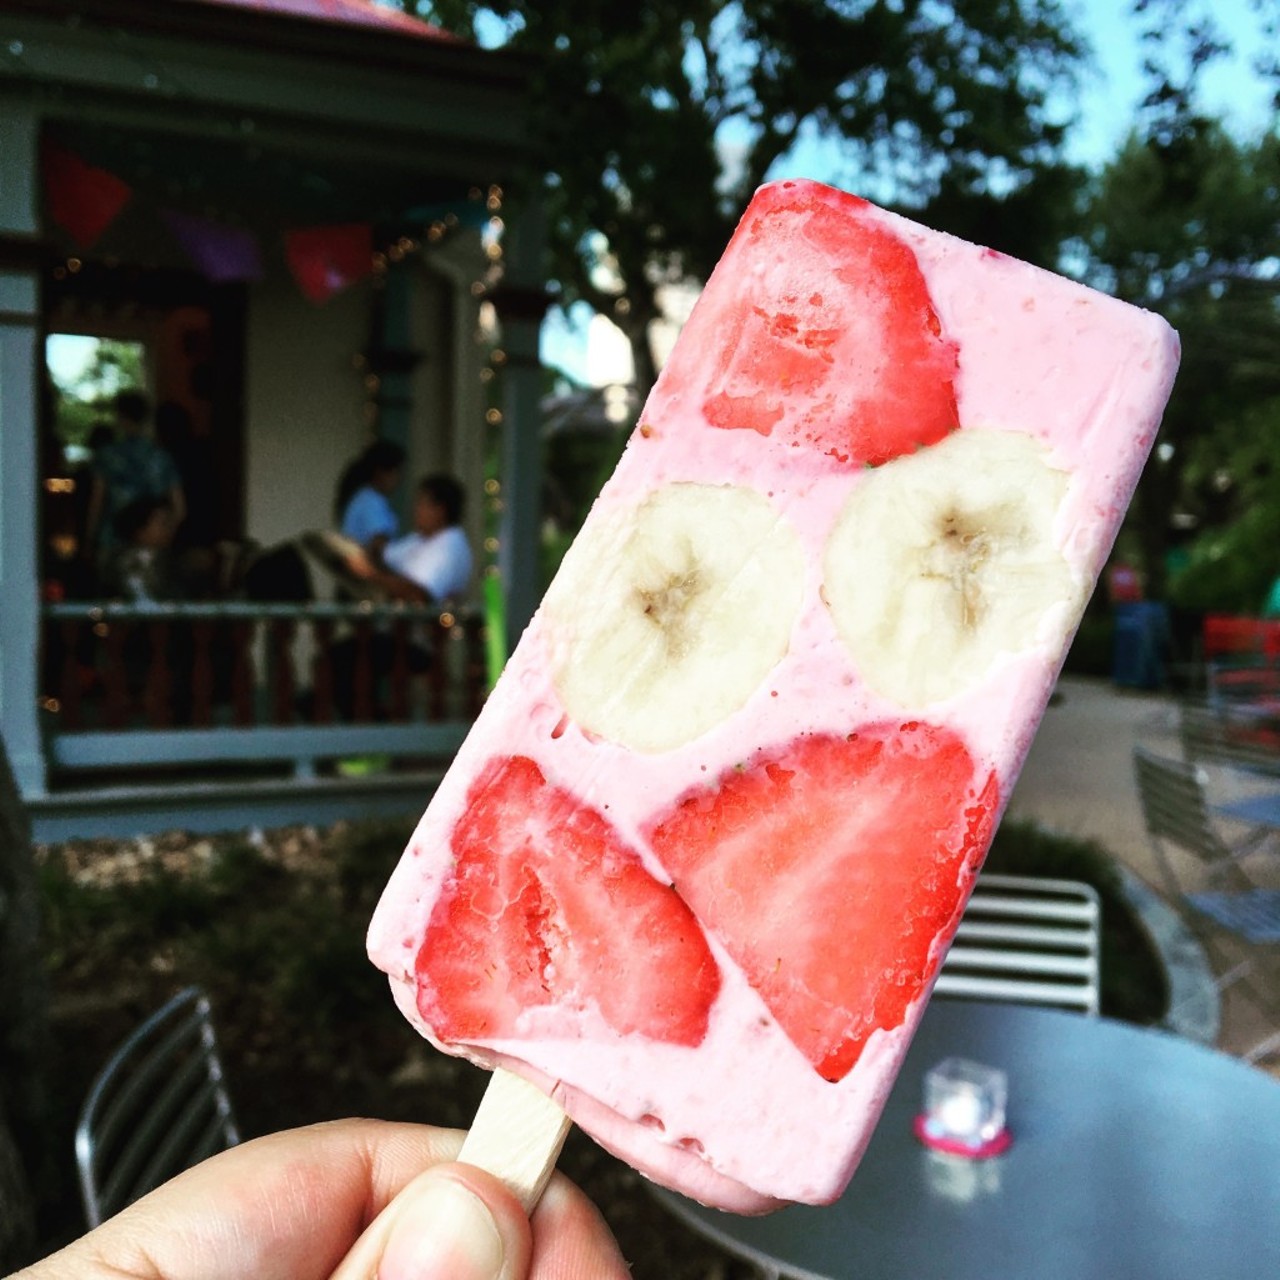 Hiding the ring inside a paleta
Just make sure it’s their favorite flavor.
Photo by Jessica Elizarraras